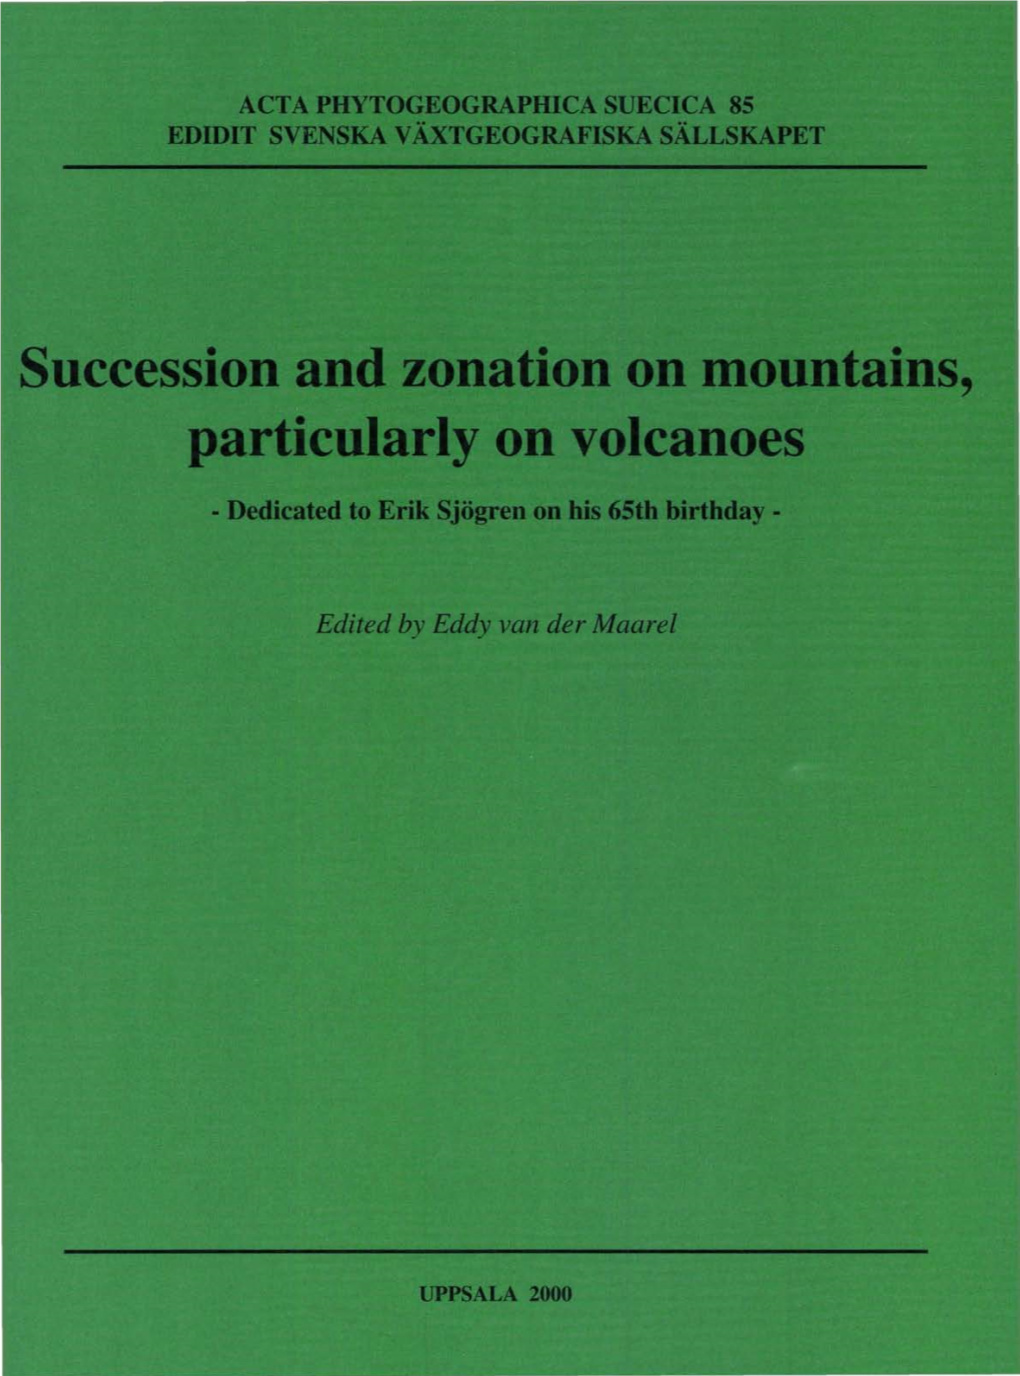 Succession and Zonation on Mountains, Particularly on Volcanoes